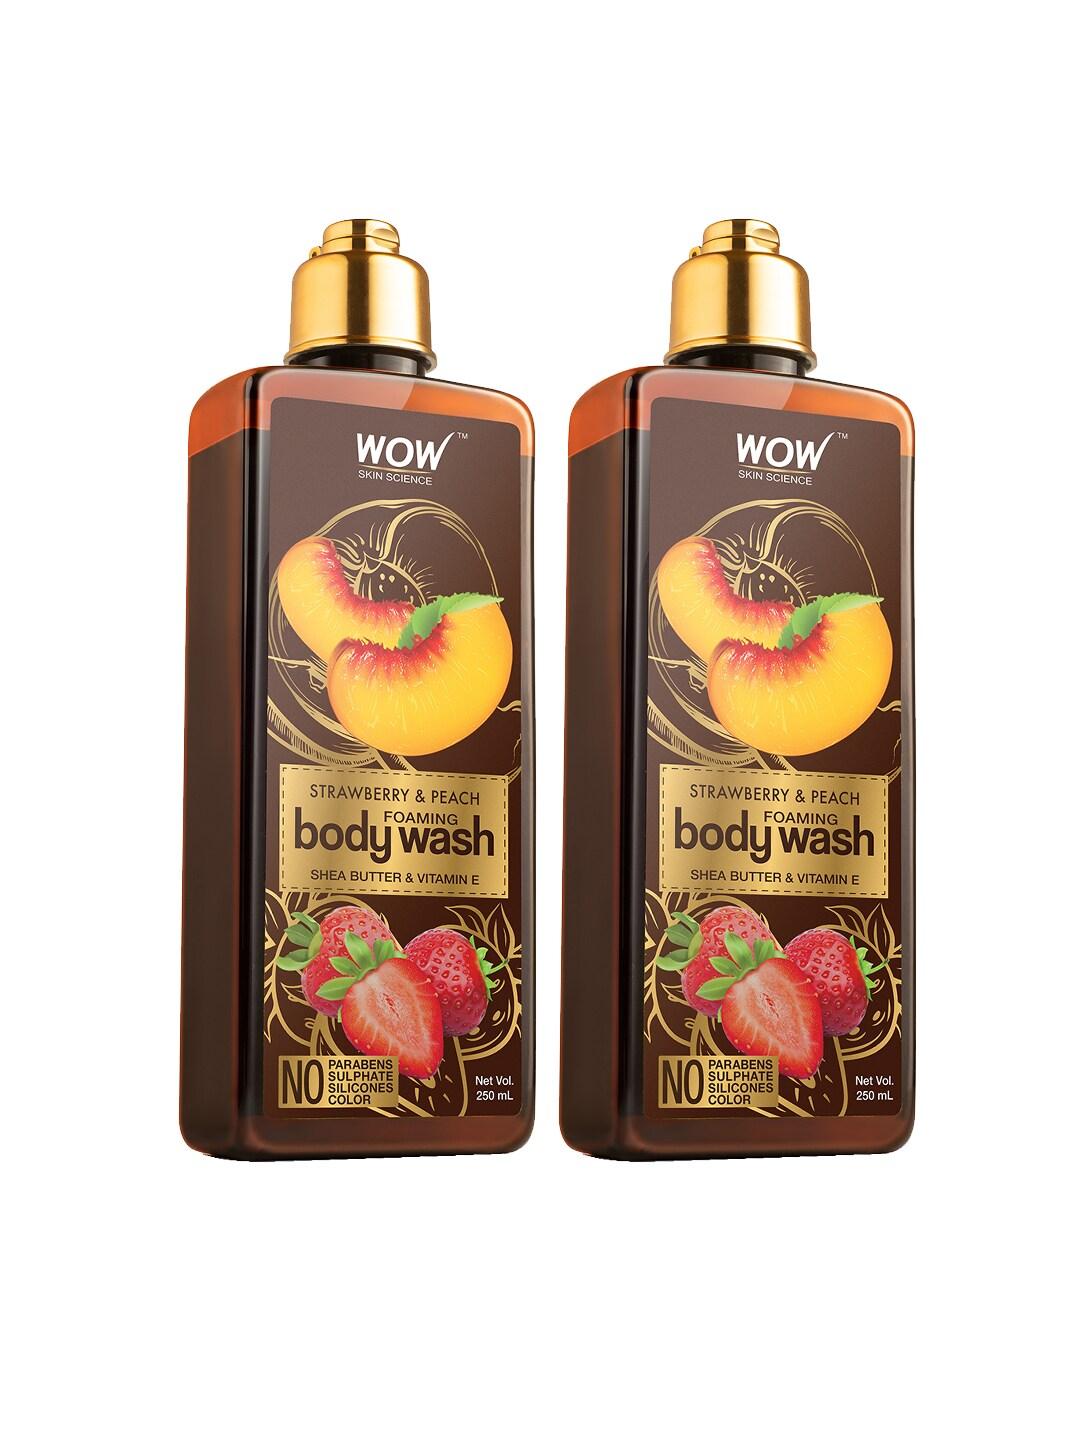 WOW SKIN SCIENCE Set of 2 Strawberry & Peach Foaming Body Washes - 250ml each